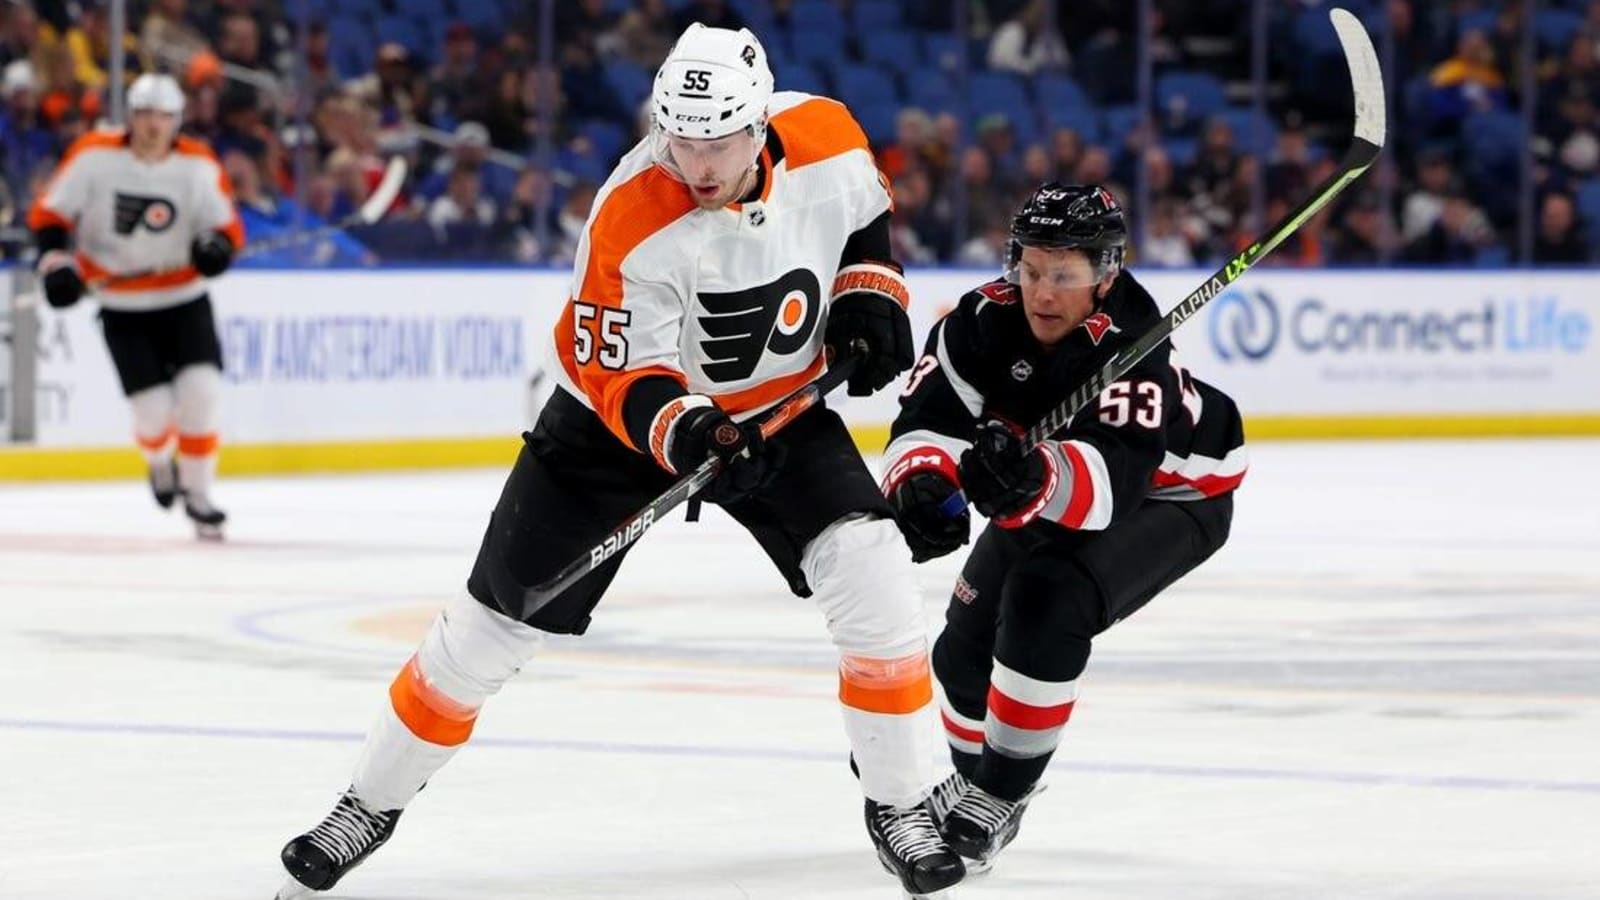 Ersson get first shutout as Flyers blank Sabres